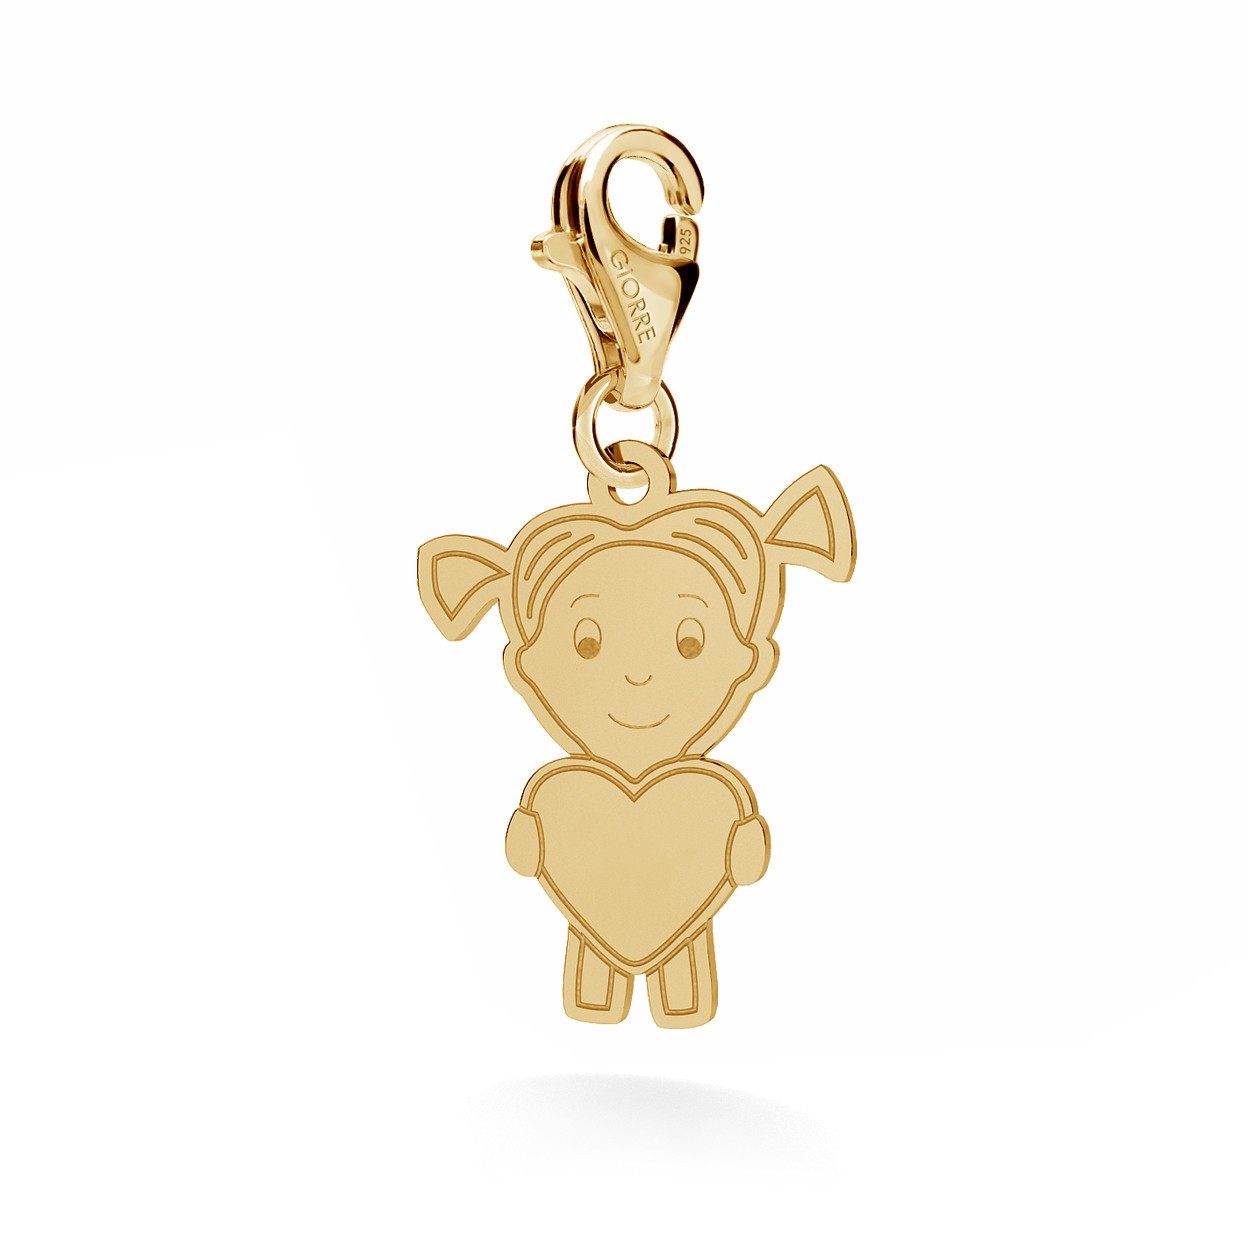 CHARM 130, GIRL OR BOY WITH ENGRAVE, STERLING SILVER (925) RHODIUM OR GOLD PLATED